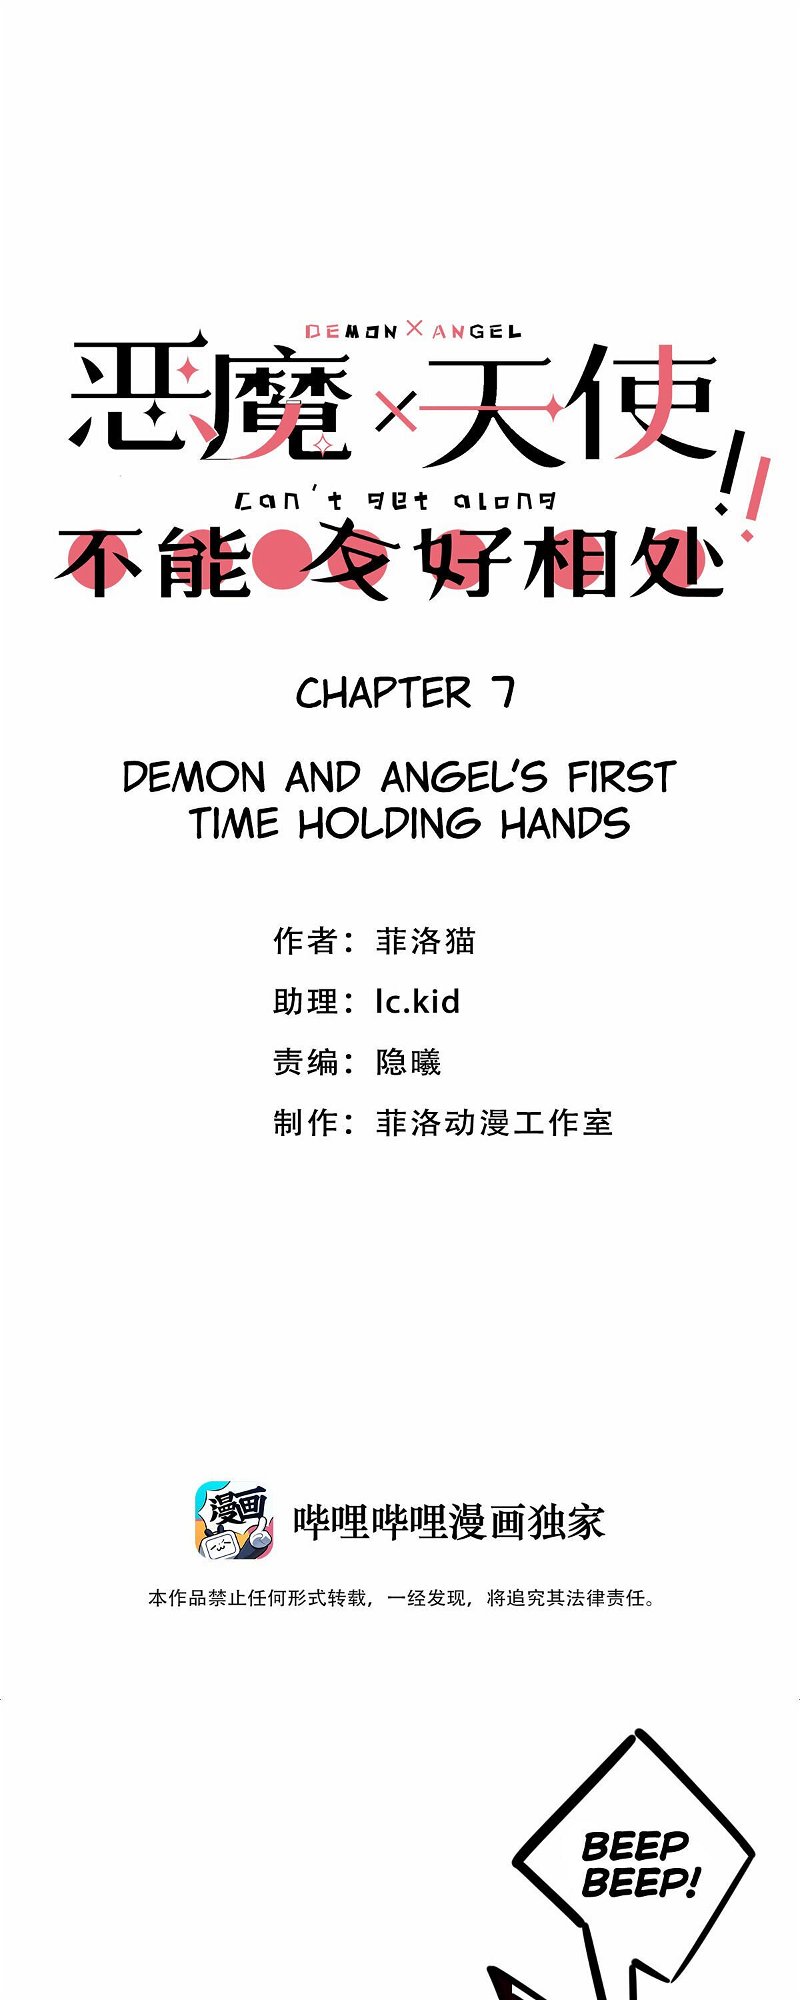 Demon X Angel, Can’t Get Along! Chapter 7 - Page 0